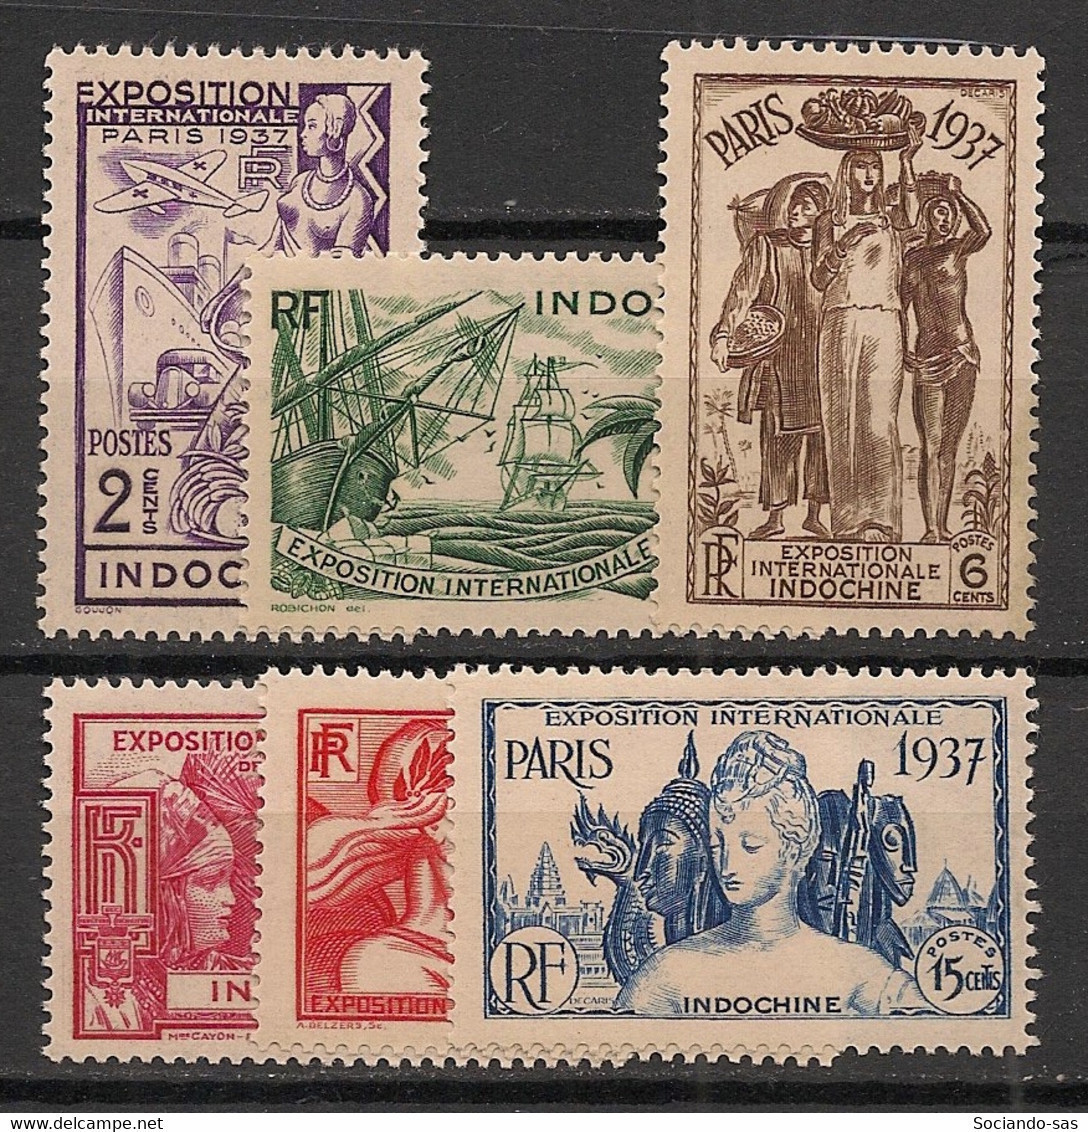 INDOCHINE - 1937 - N°YT. 193 à 198 - Exposition Internationale - Série Complète - Neuf * / MH VF - Unused Stamps